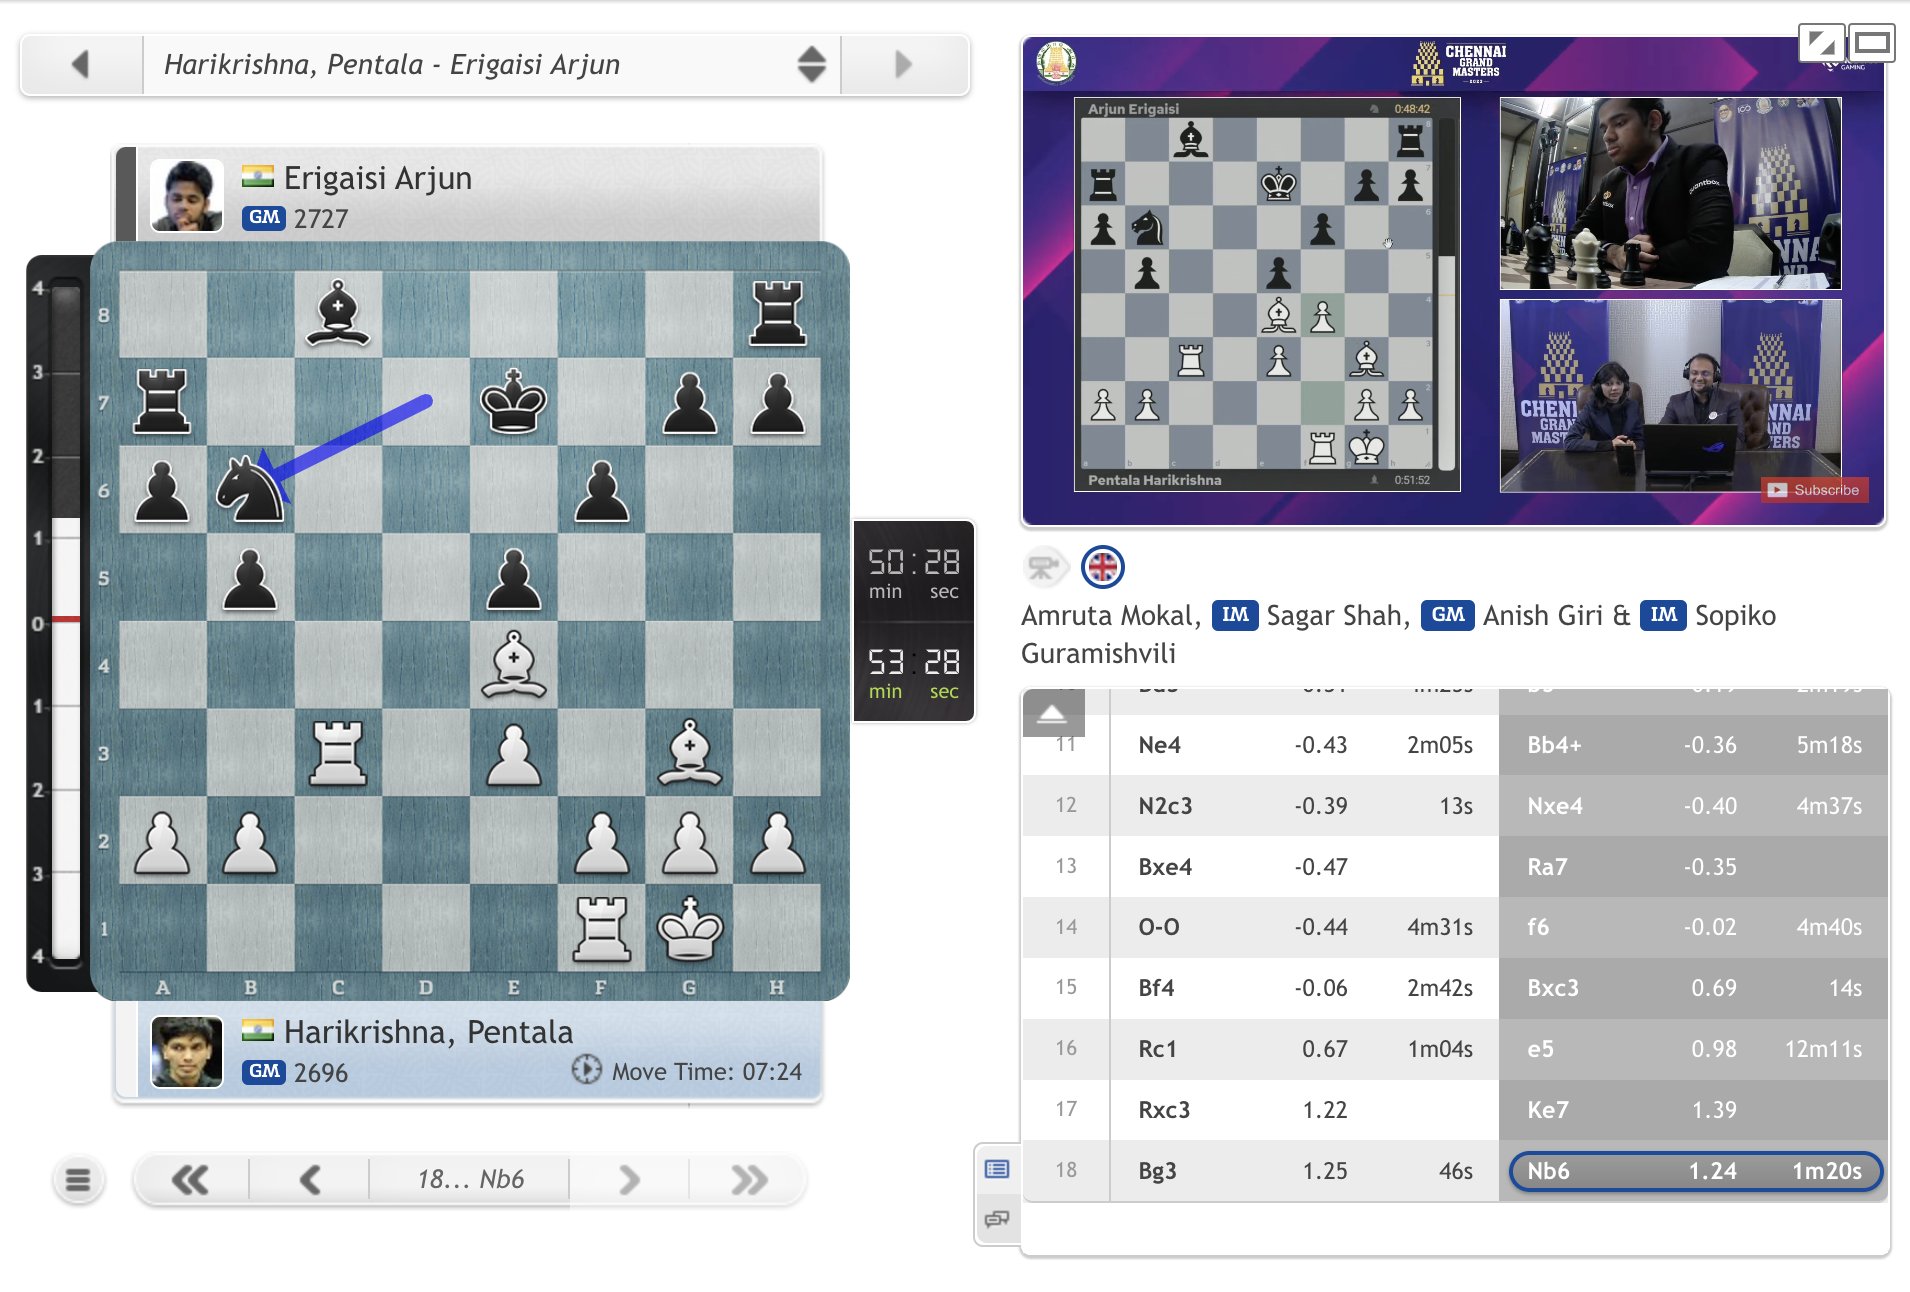 chess24.com on X: Arjun looks to be in some trouble vs. Harikrishna in a  tournament he needs to win to boost his Candidates chances!   #c24live #ChennaiGM  / X